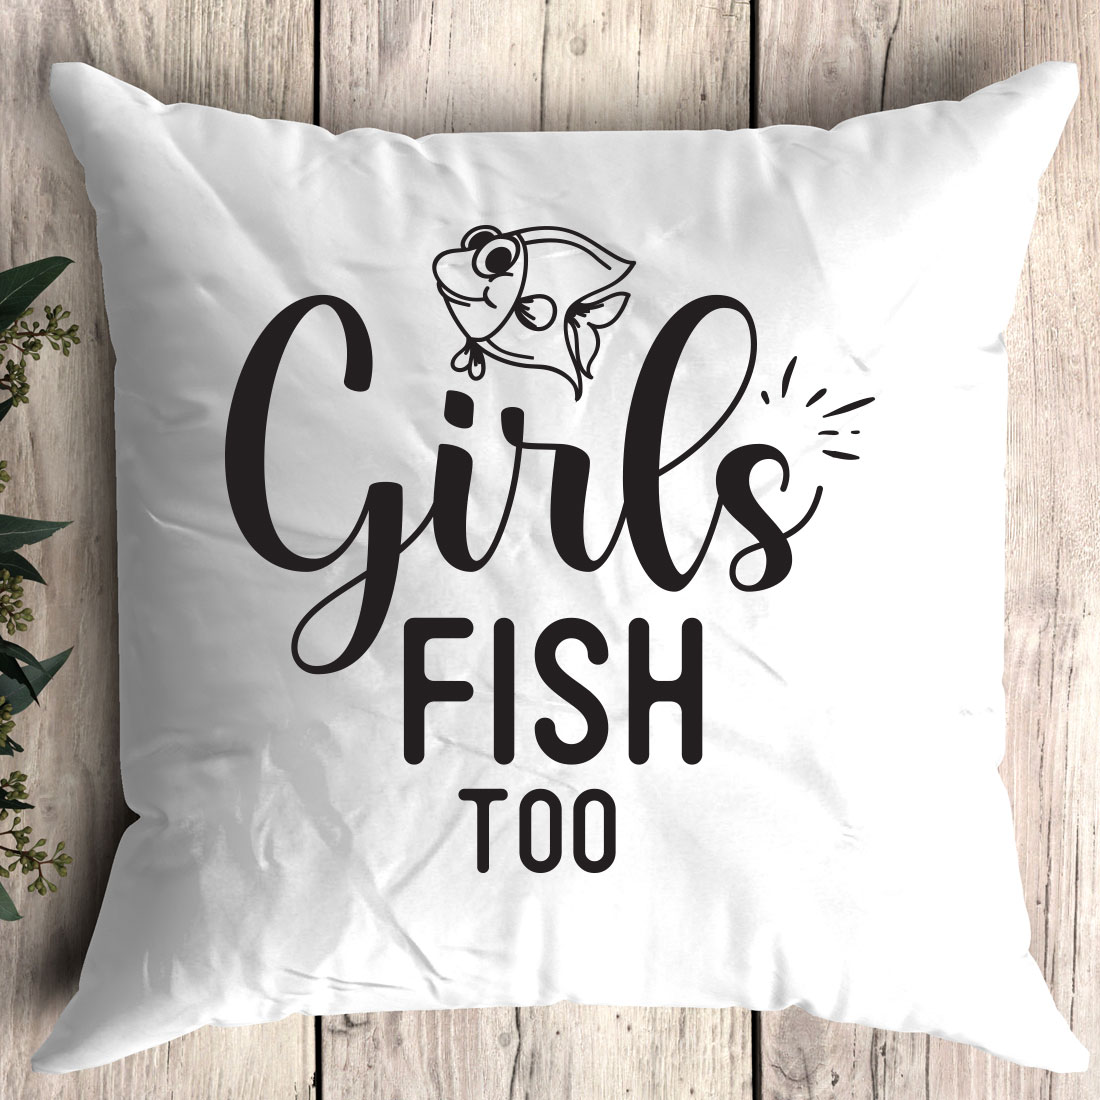 White pillow with the words girls fish too on it.